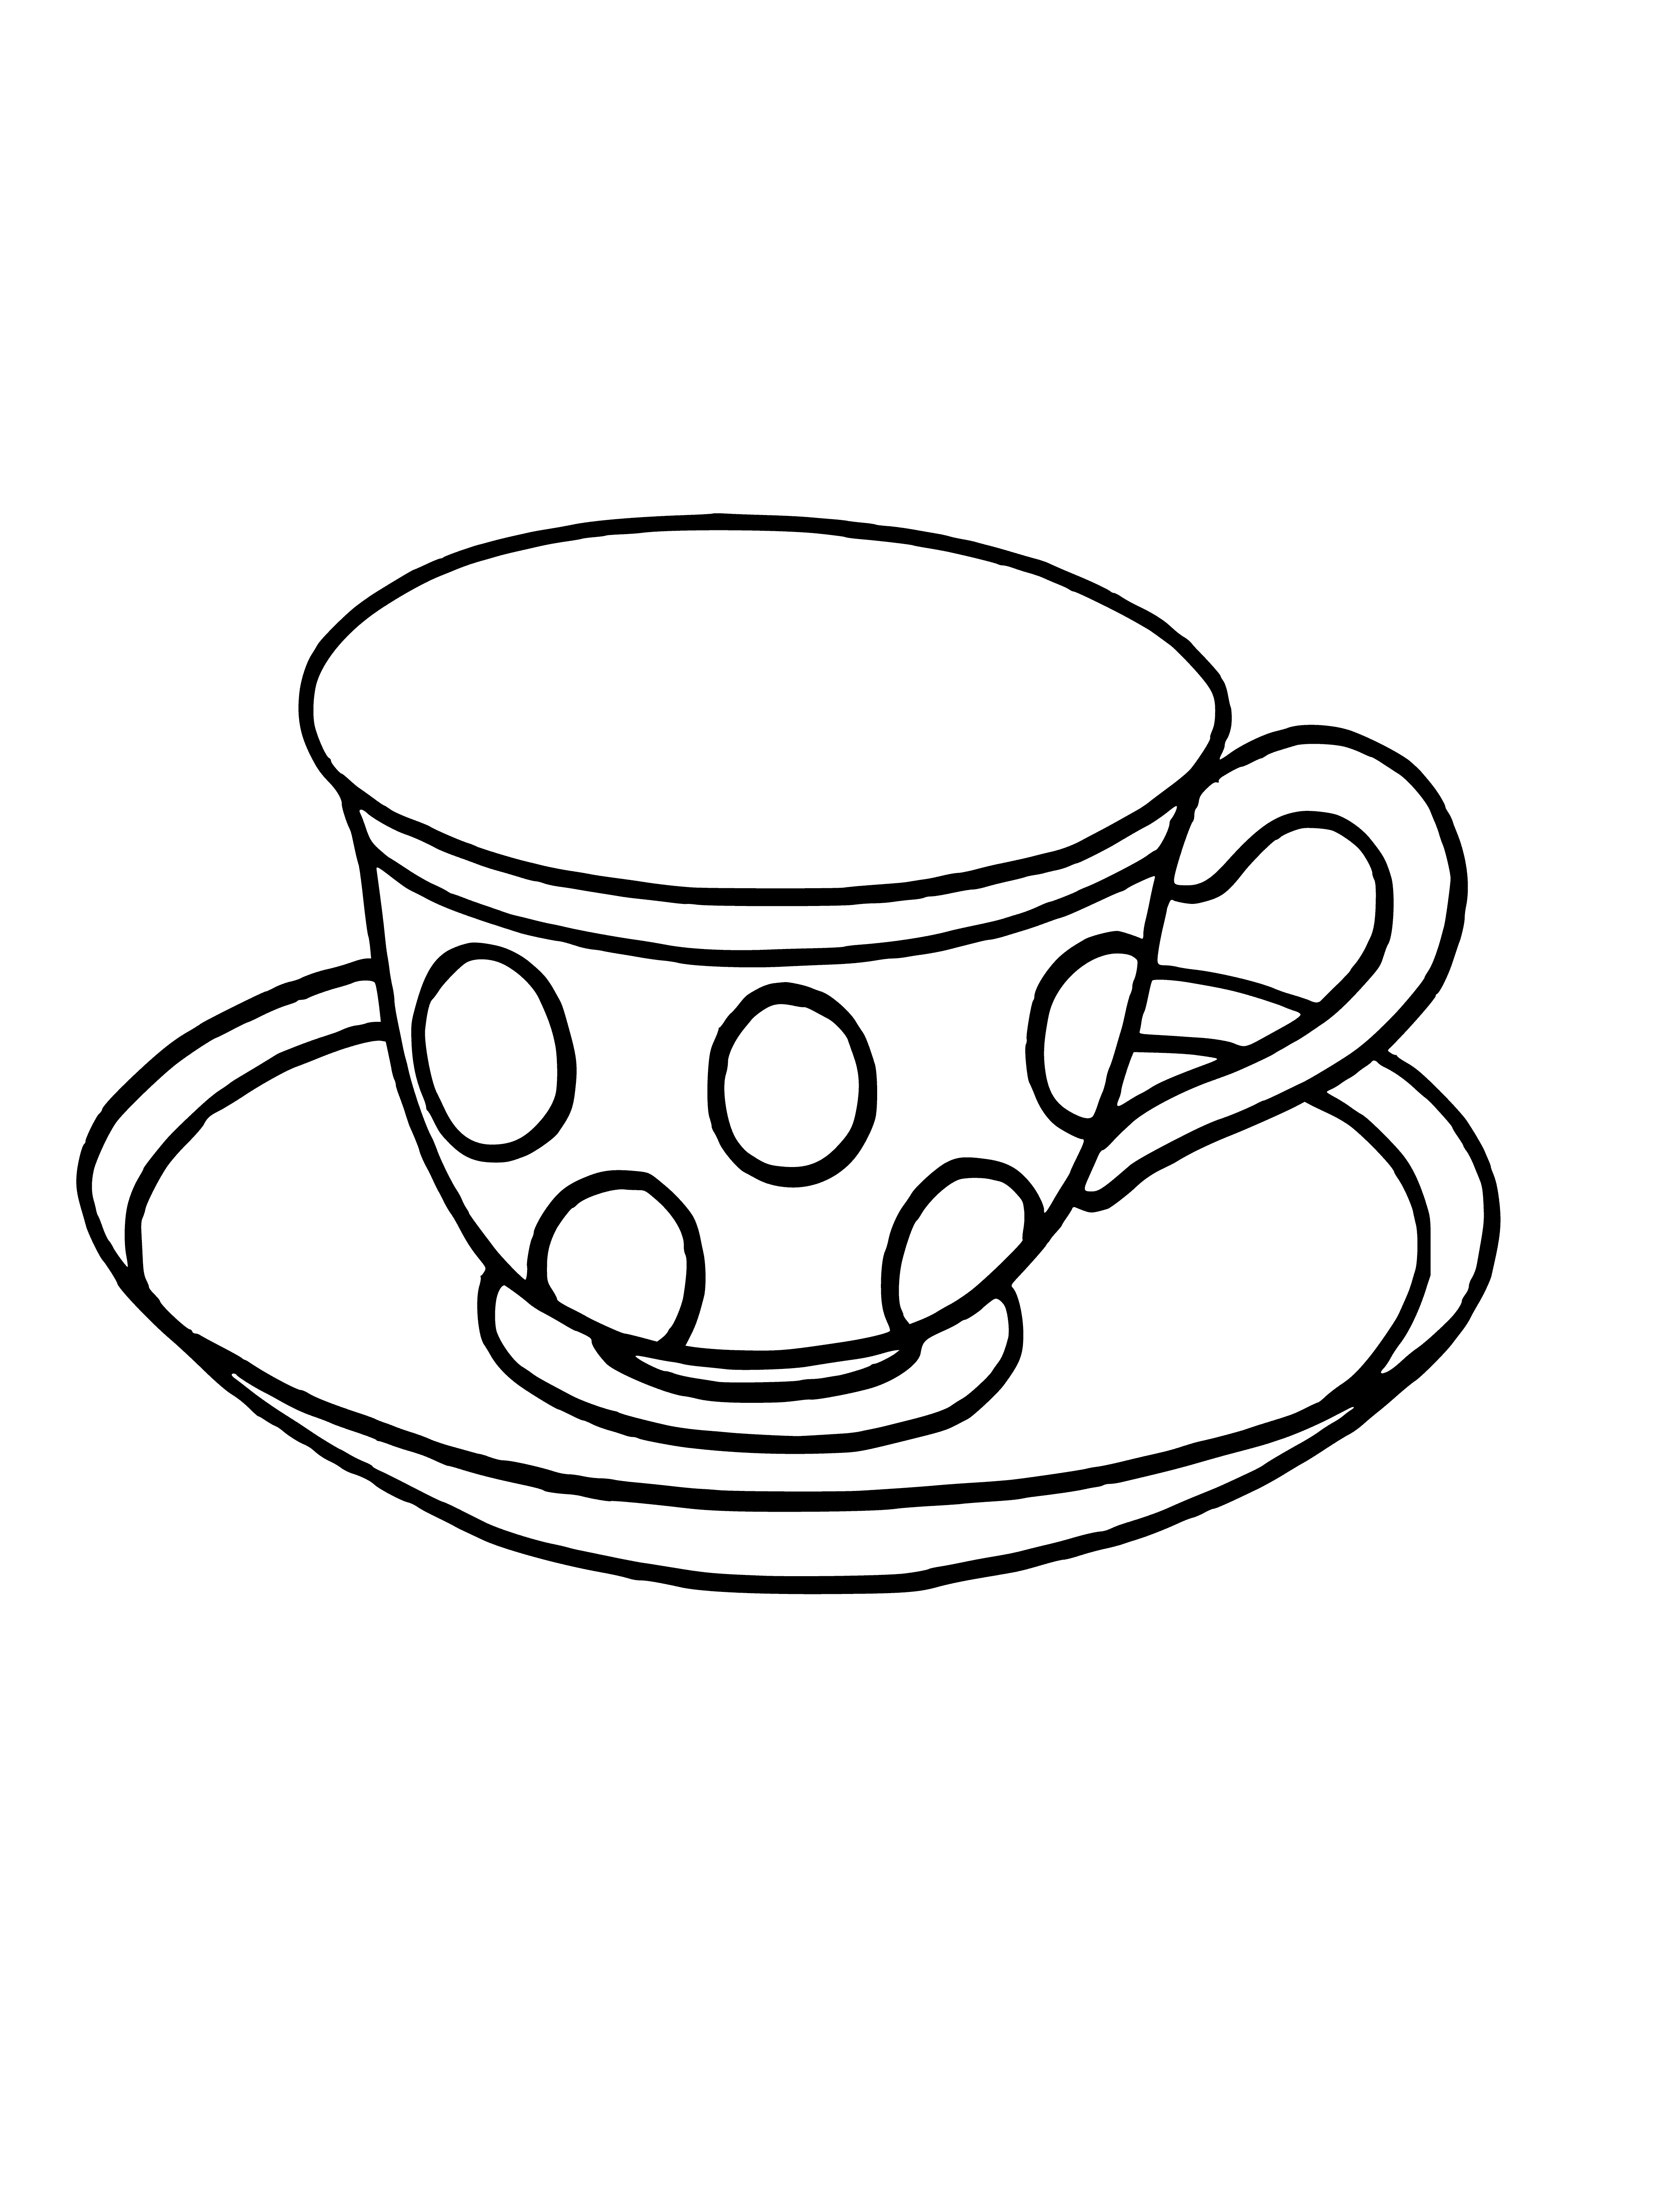 coloring page: A cup is a small, round, open container made of plastic, ceramic, or glass used to hold liquids.